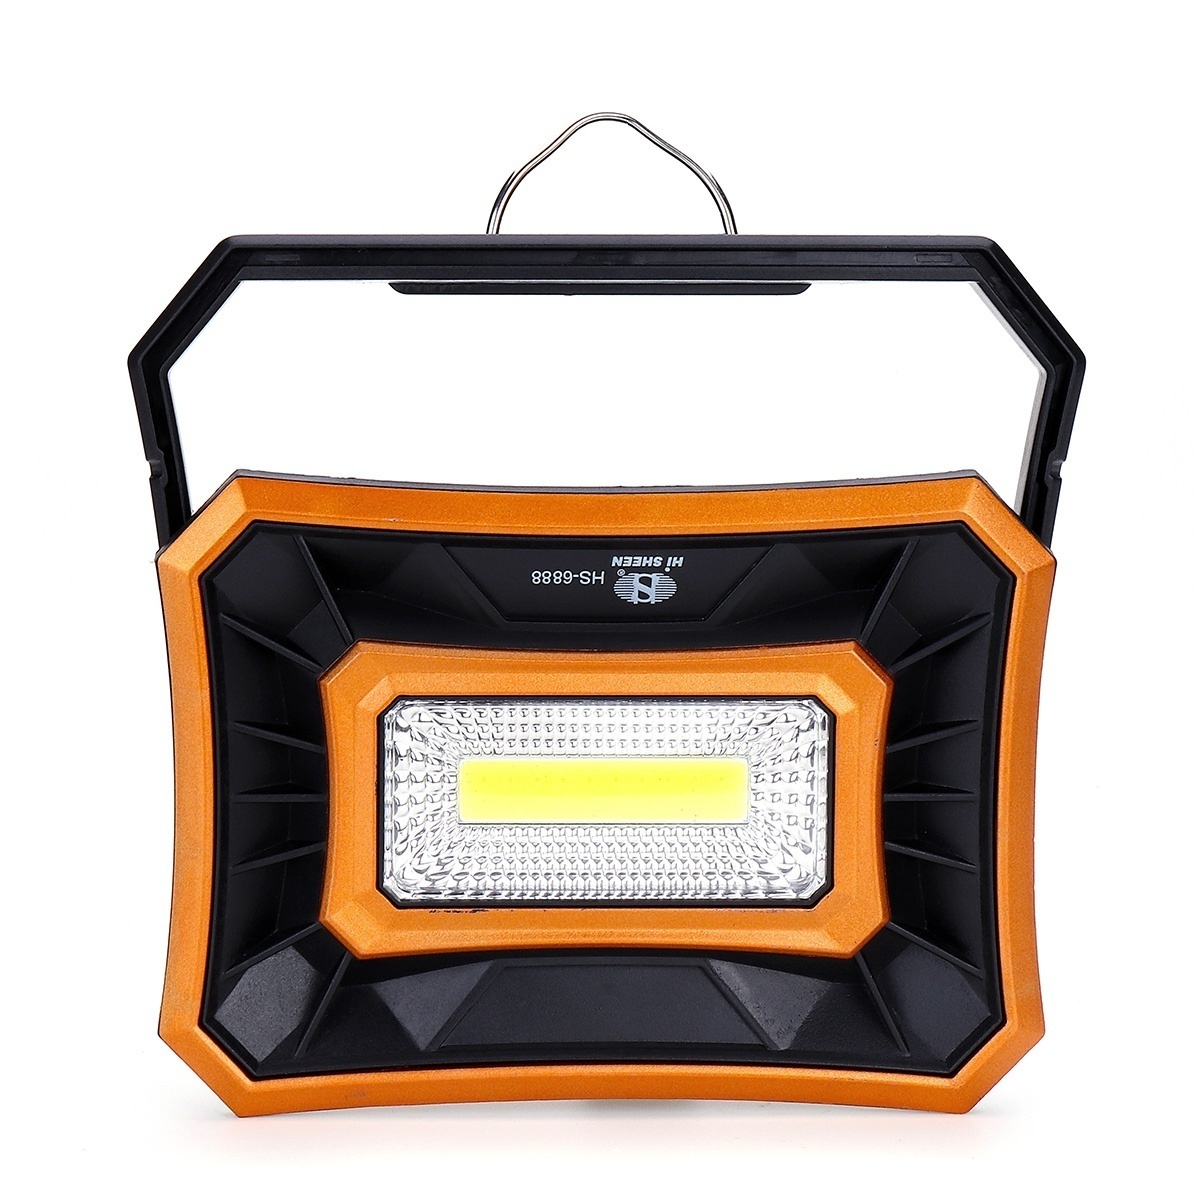 Rechargeable-Work-Light-50W-1000LM-USB-Waterproof-COB-LED-Worklight-Flood-Lamp-Battery-Powered-2-Lig-1430604